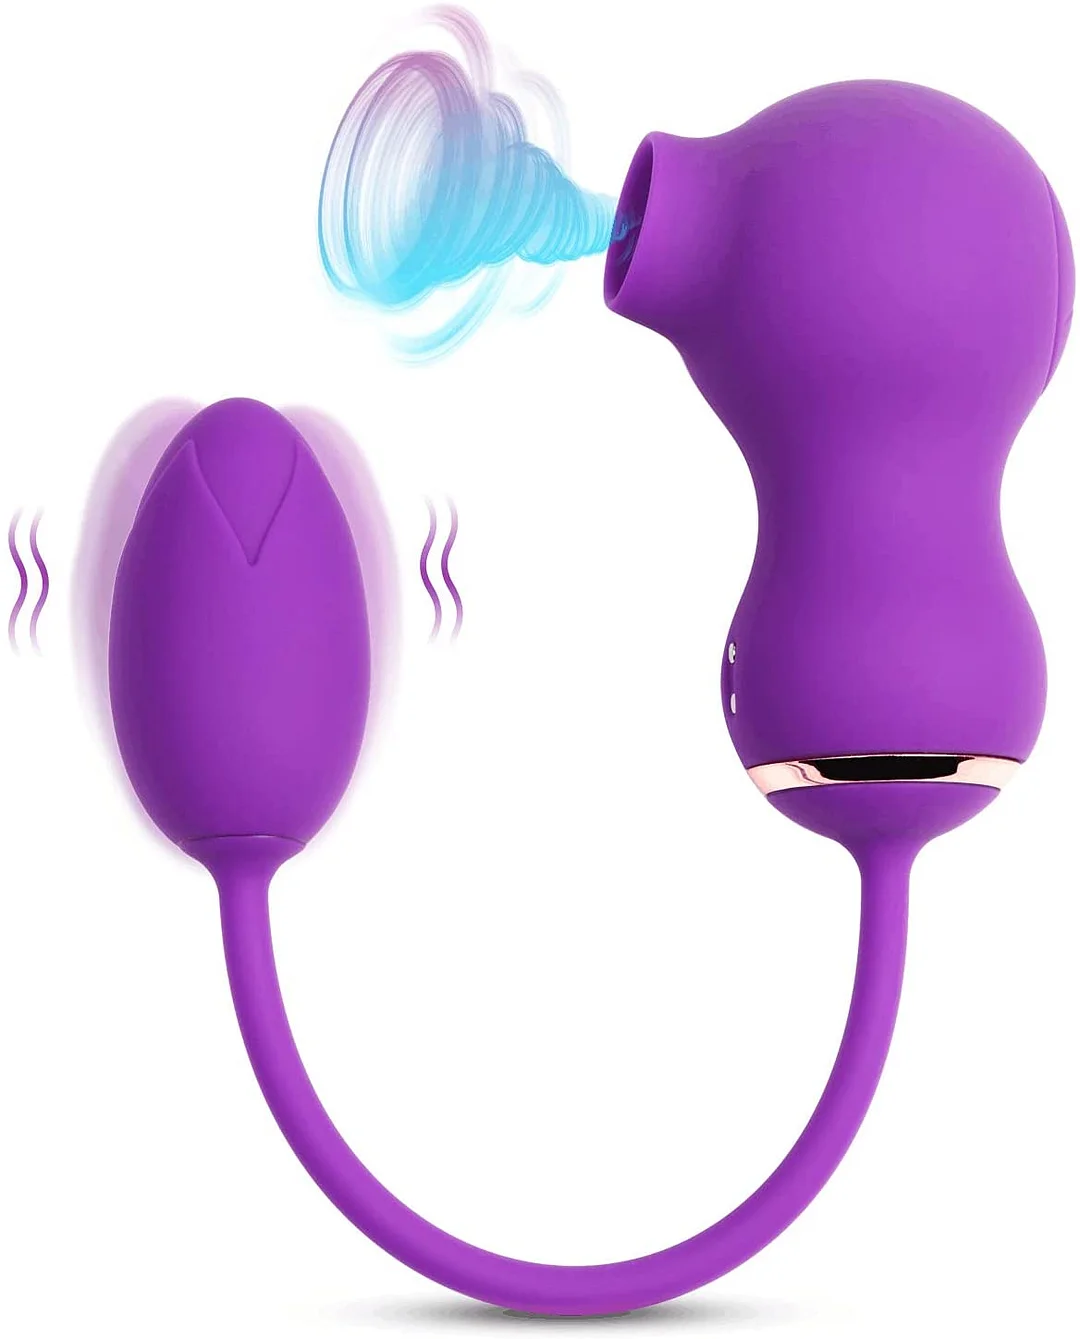 2 in 1 Clit & G-spot Stimulator with 7 Suction & 7 Vibration Modes